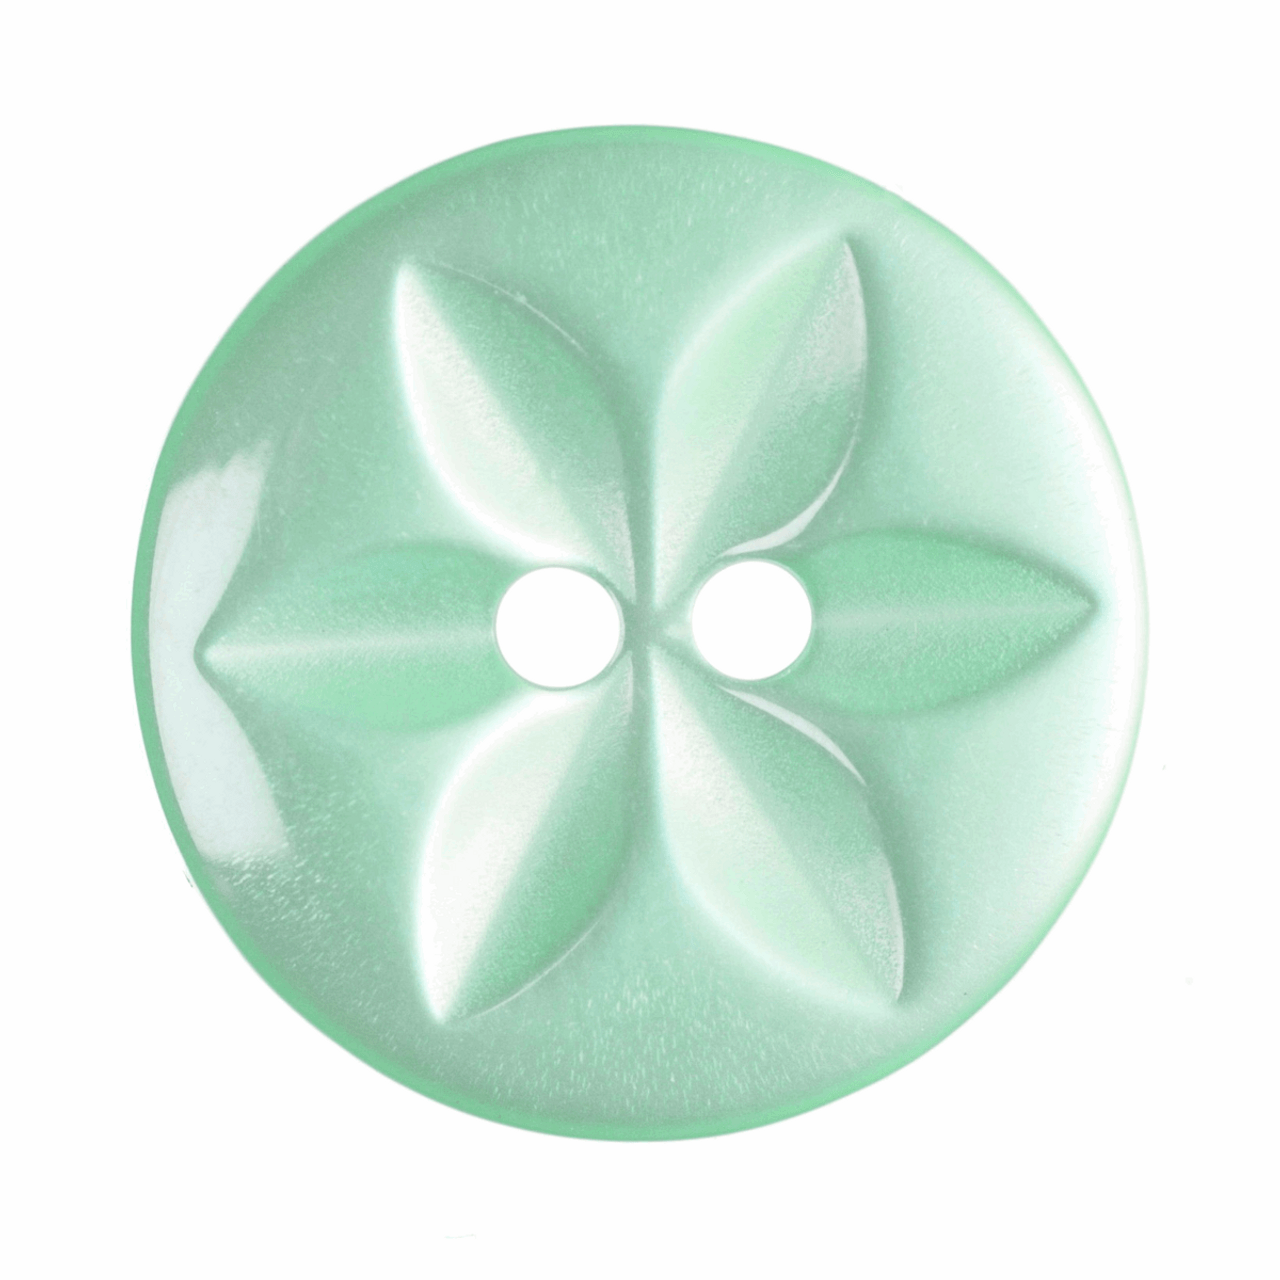 Mint Star Button, 11mm (7/16in) Diameter (Sold Individually)